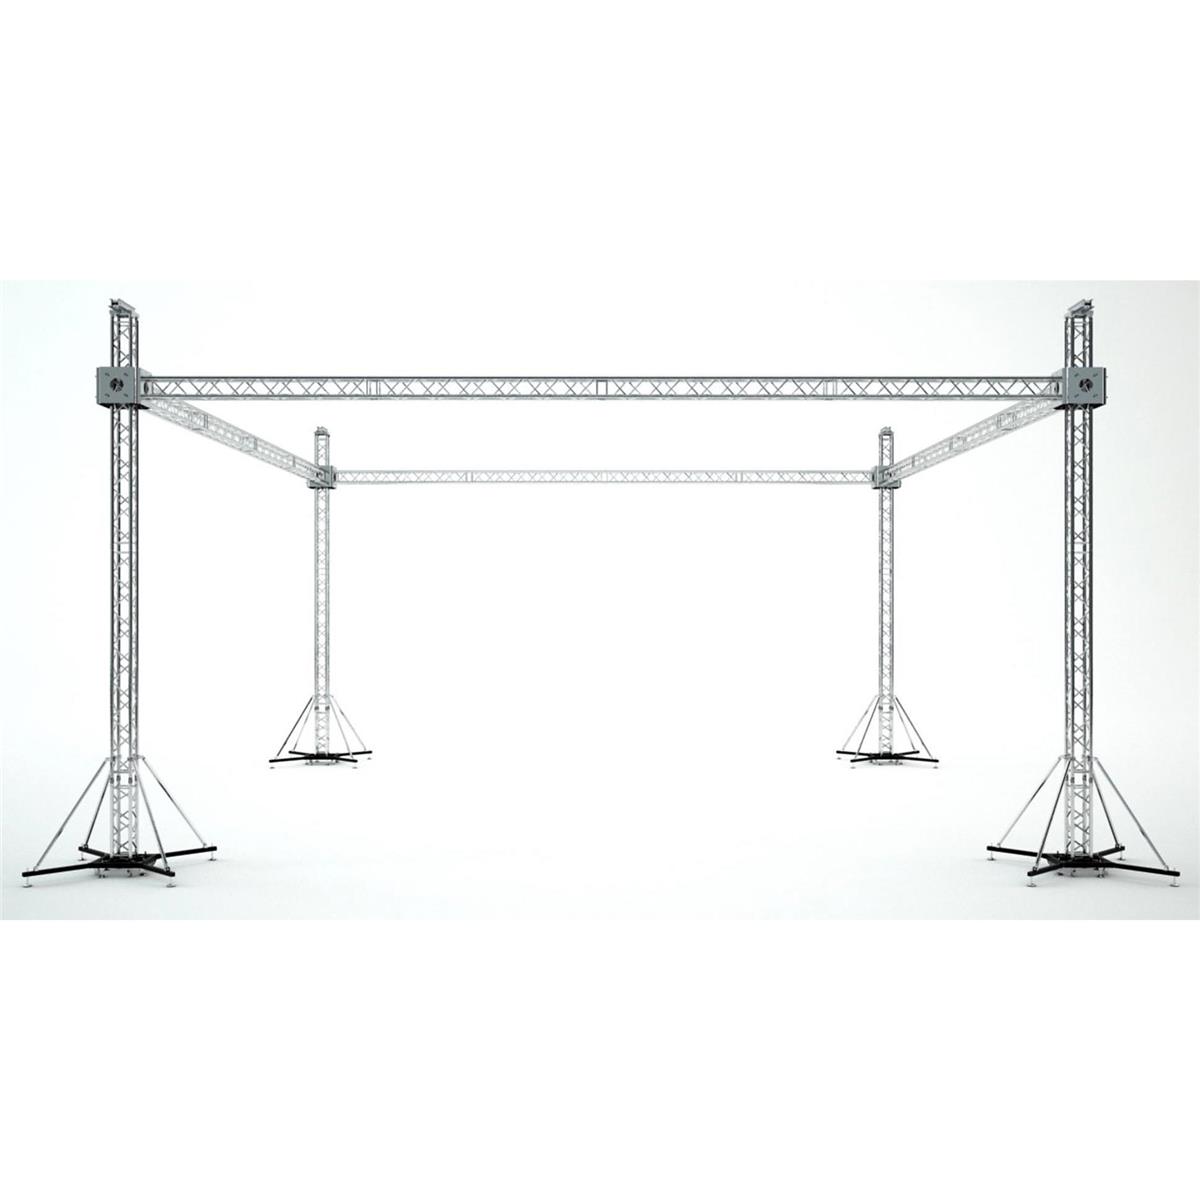 Image of ProX XTP-GS404023 Stage Roofing System with 4 Chain Hoist